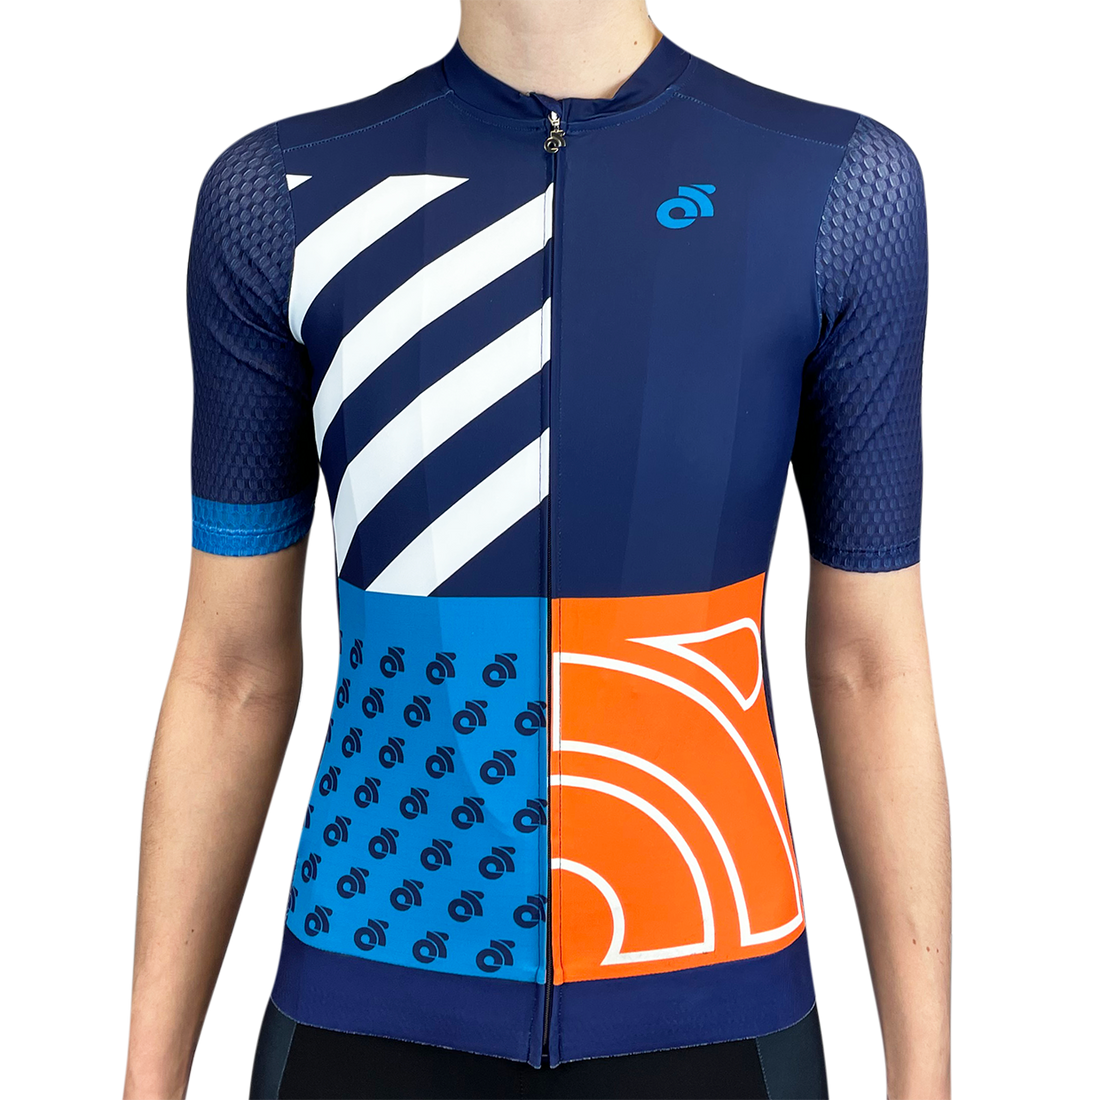 Apex+ PRO Jersey "EVERY DAY"